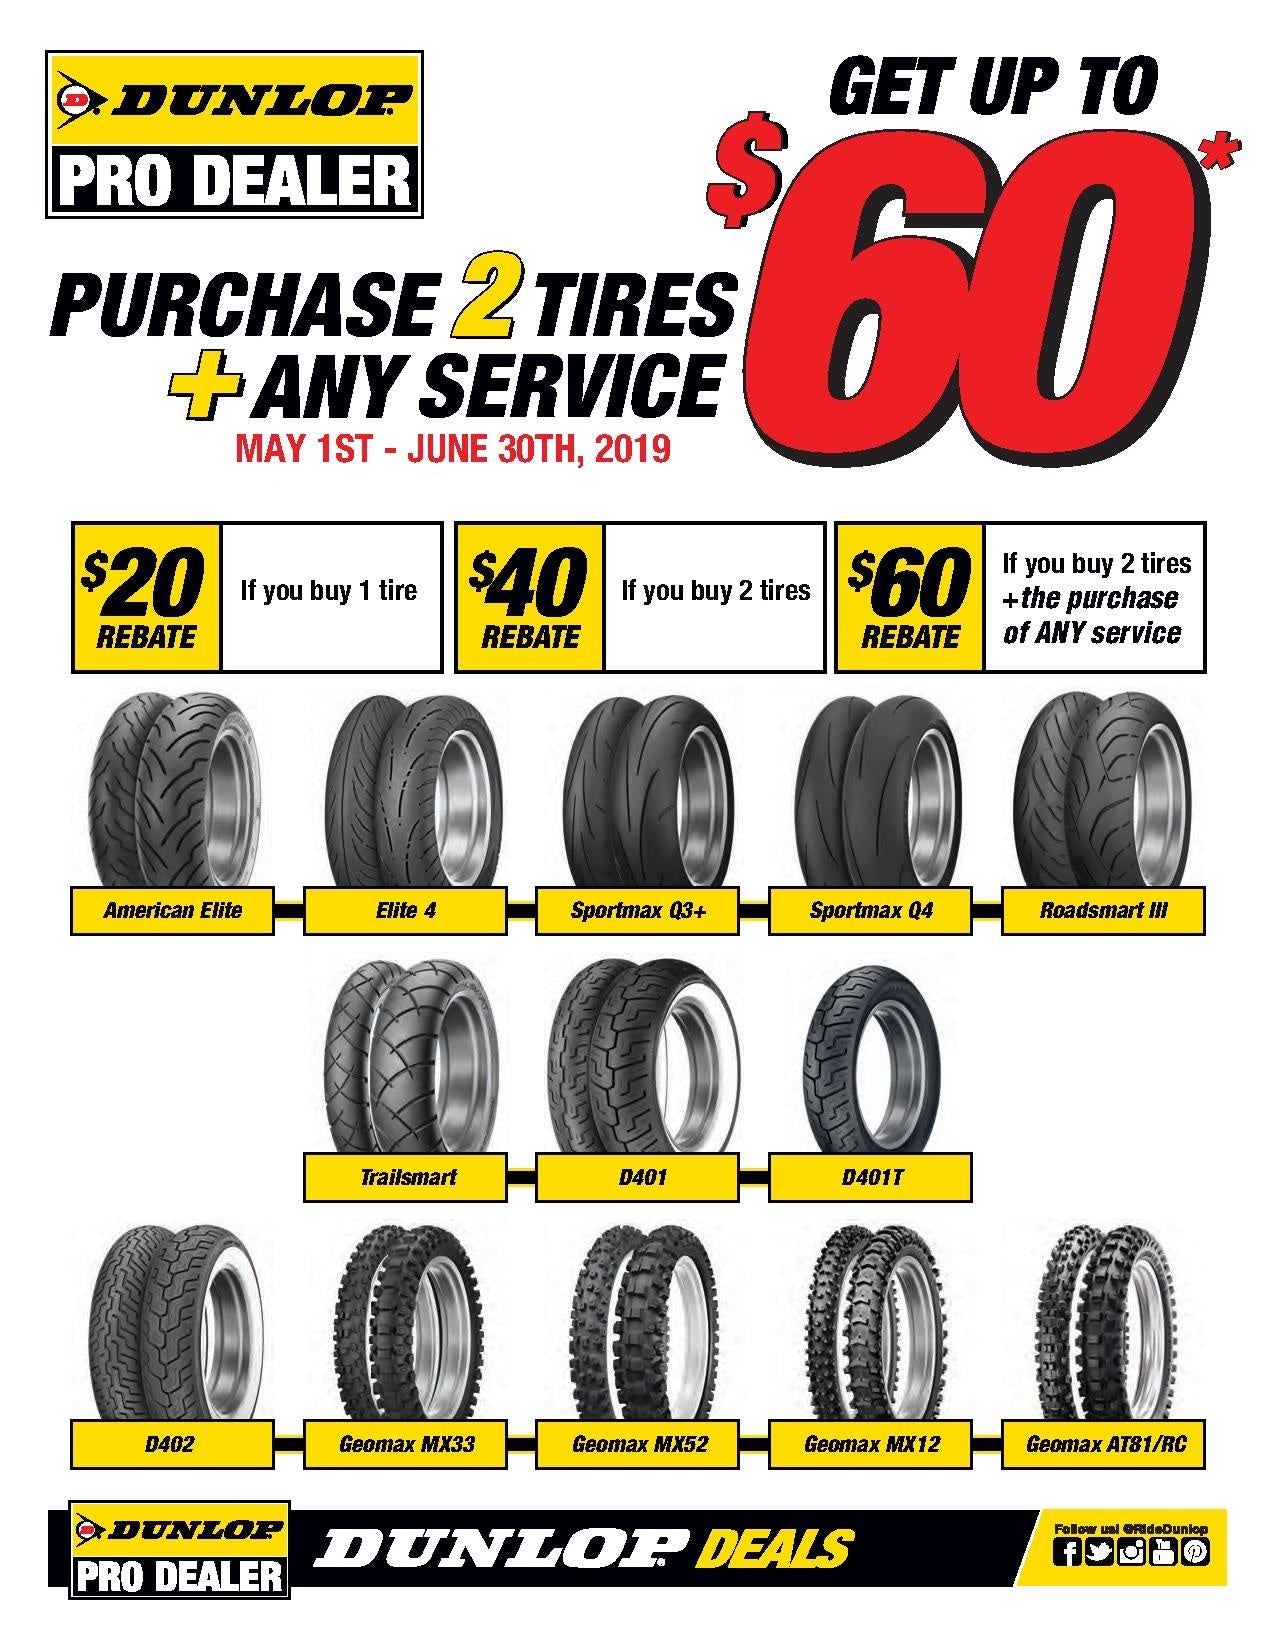 Exclusive to Dunlop Pro Dealers - Extended Spring Promo